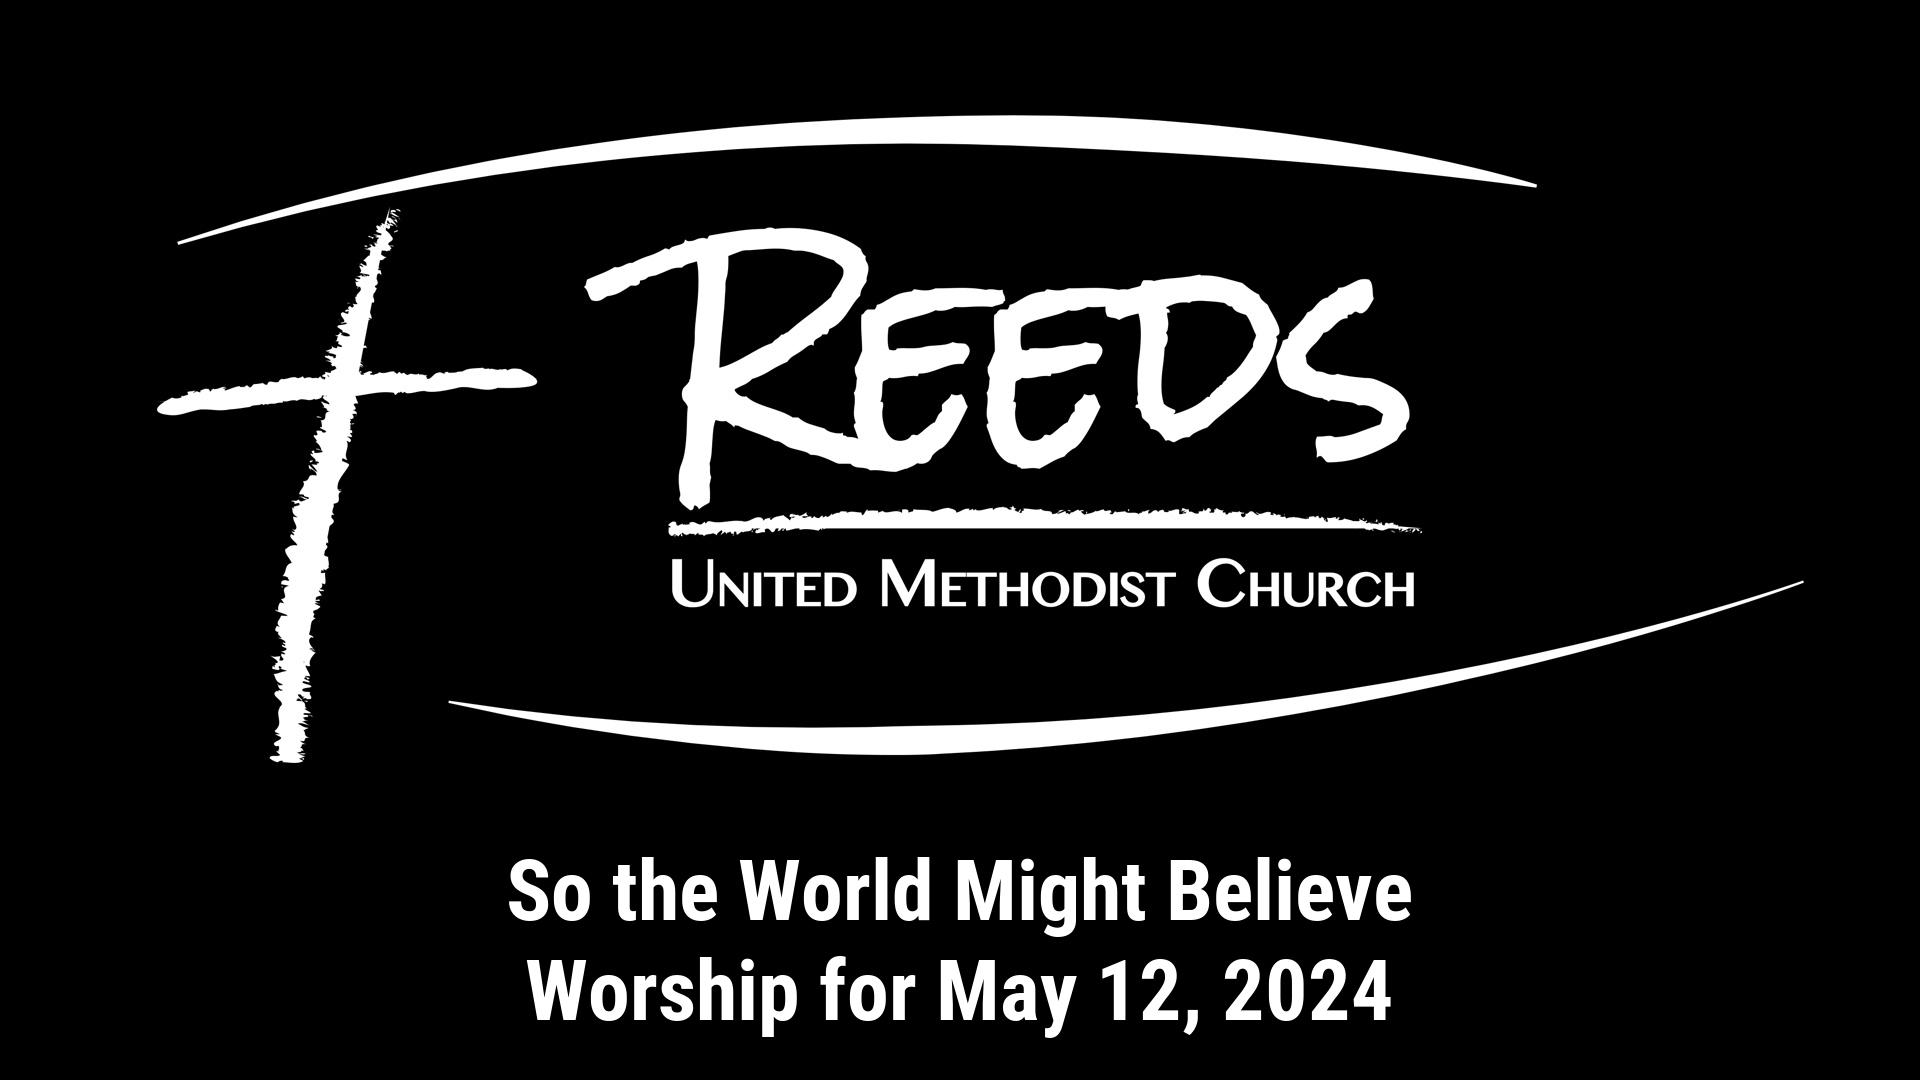 Reeds UMC logo with sermon title, "So the World Might Believe" with the date, "May 12, 2024."